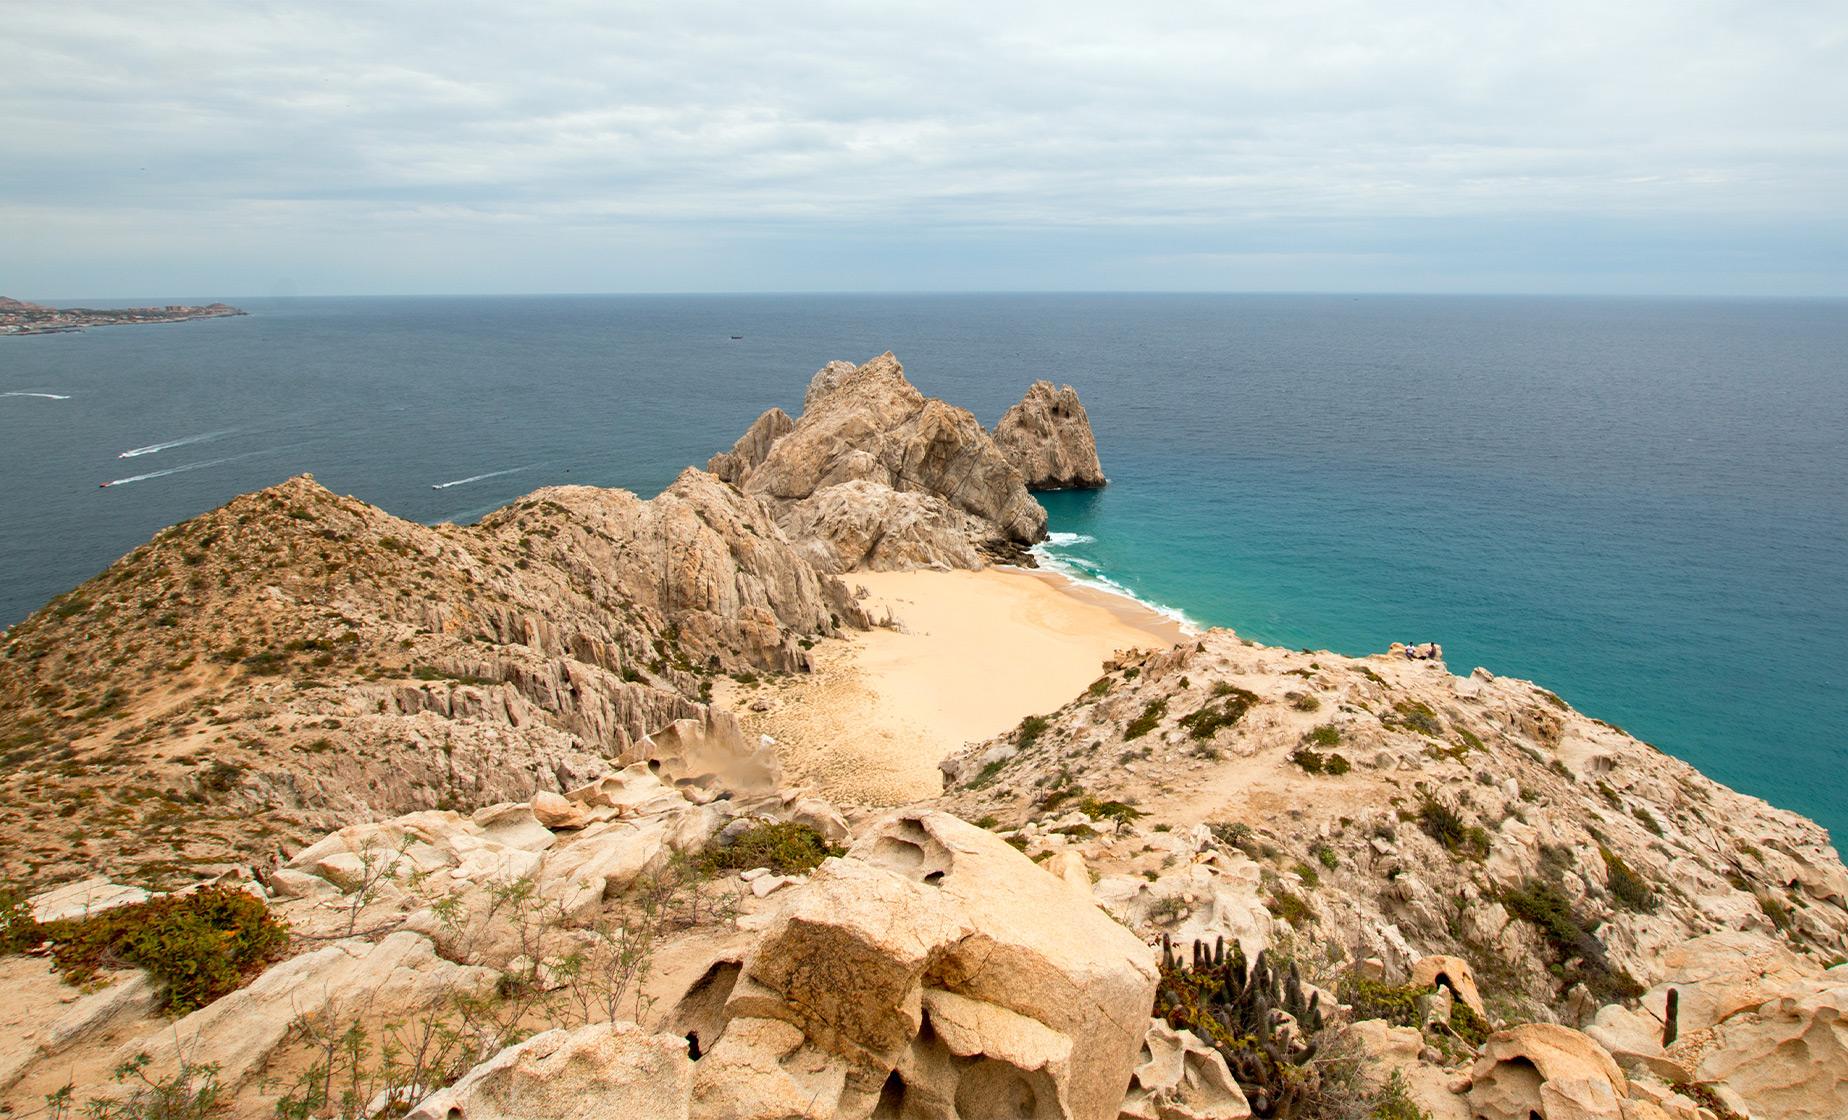 Jeep Adventure and Hiking at Fox Canyon Tour from Cabo San Lucas